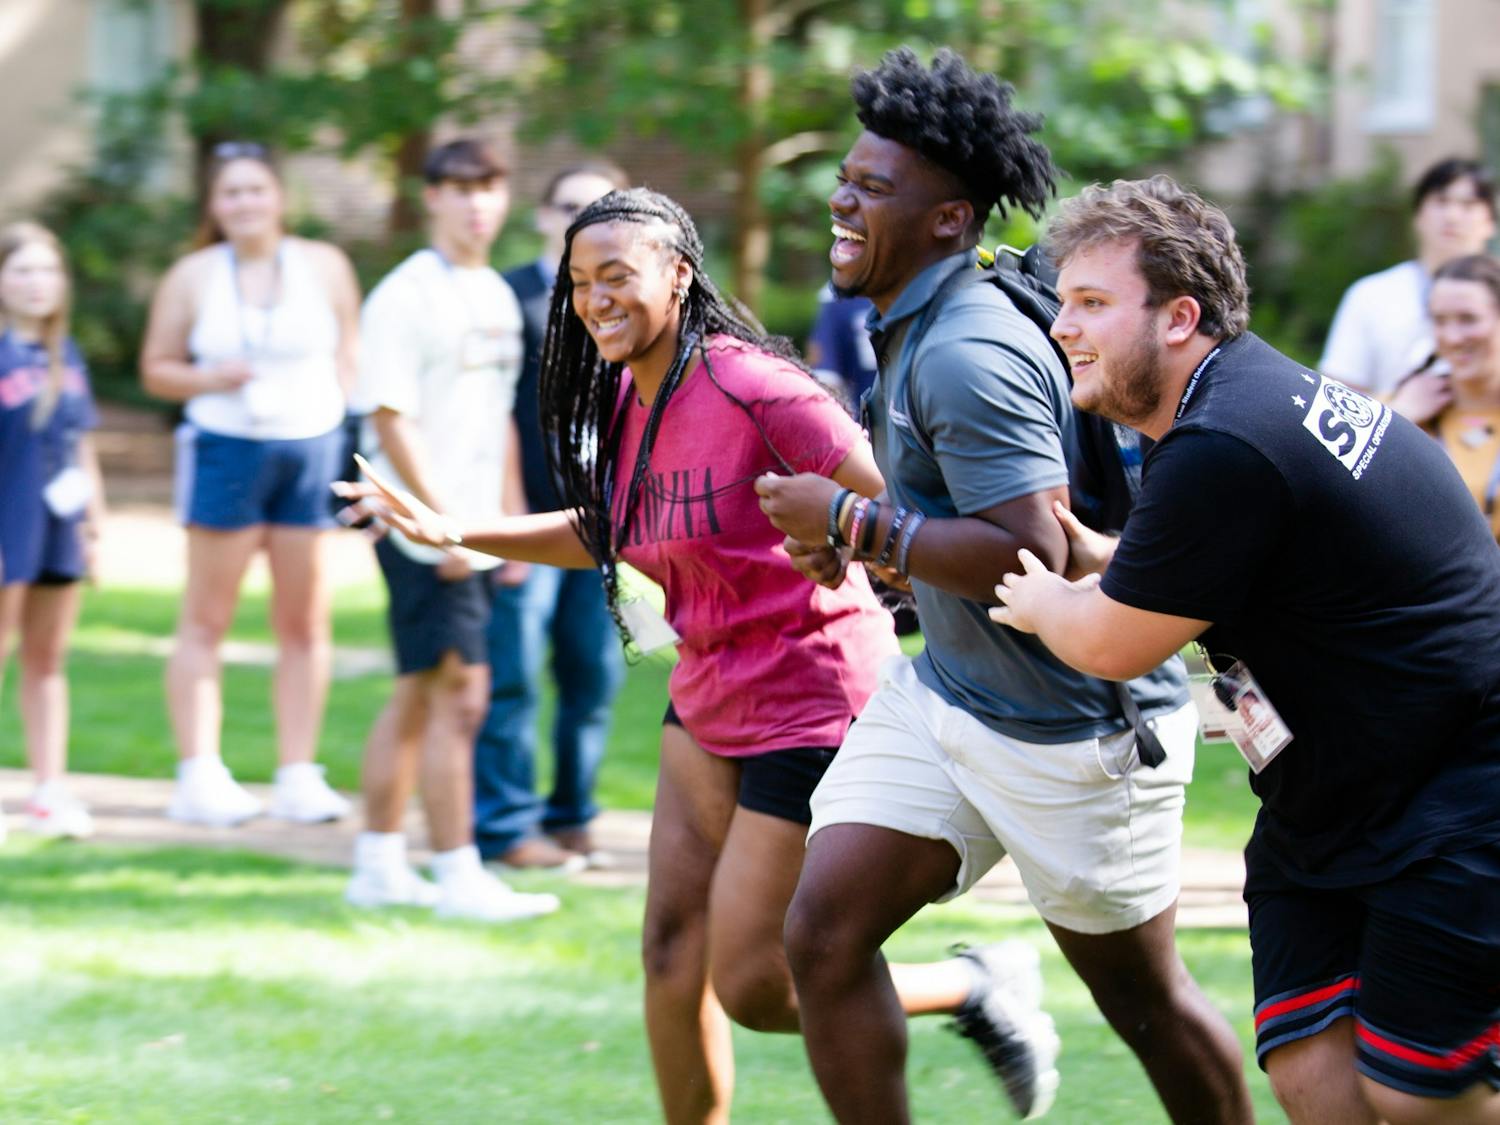 Two incoming students race to be the first to bring an orientation leader to their group. This game is played during orientation sessions throughout the summer to help new students have fun and make friends before starting their freshman year in the fall.